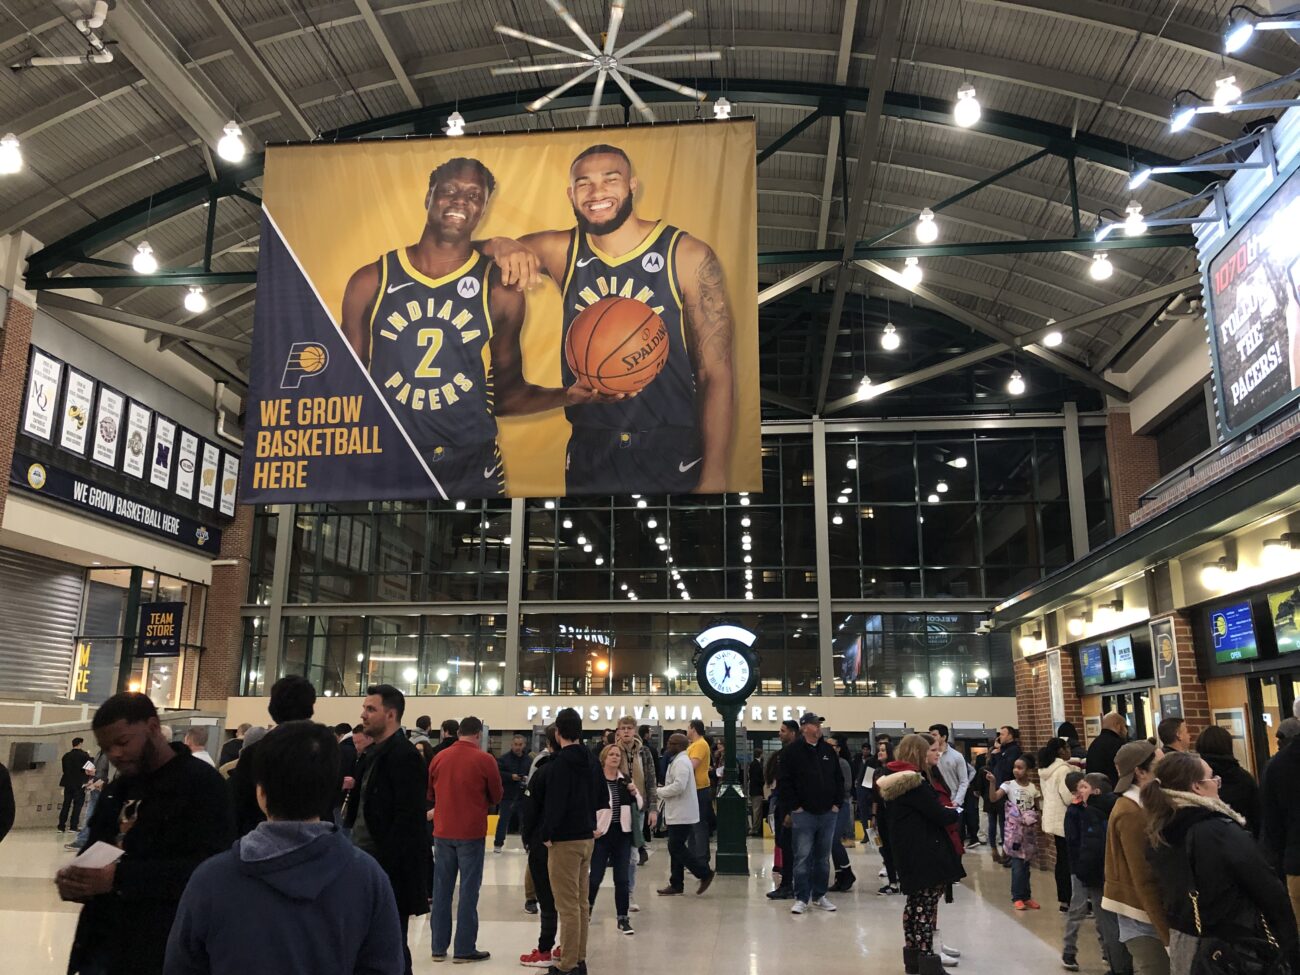 Pacers Team Store